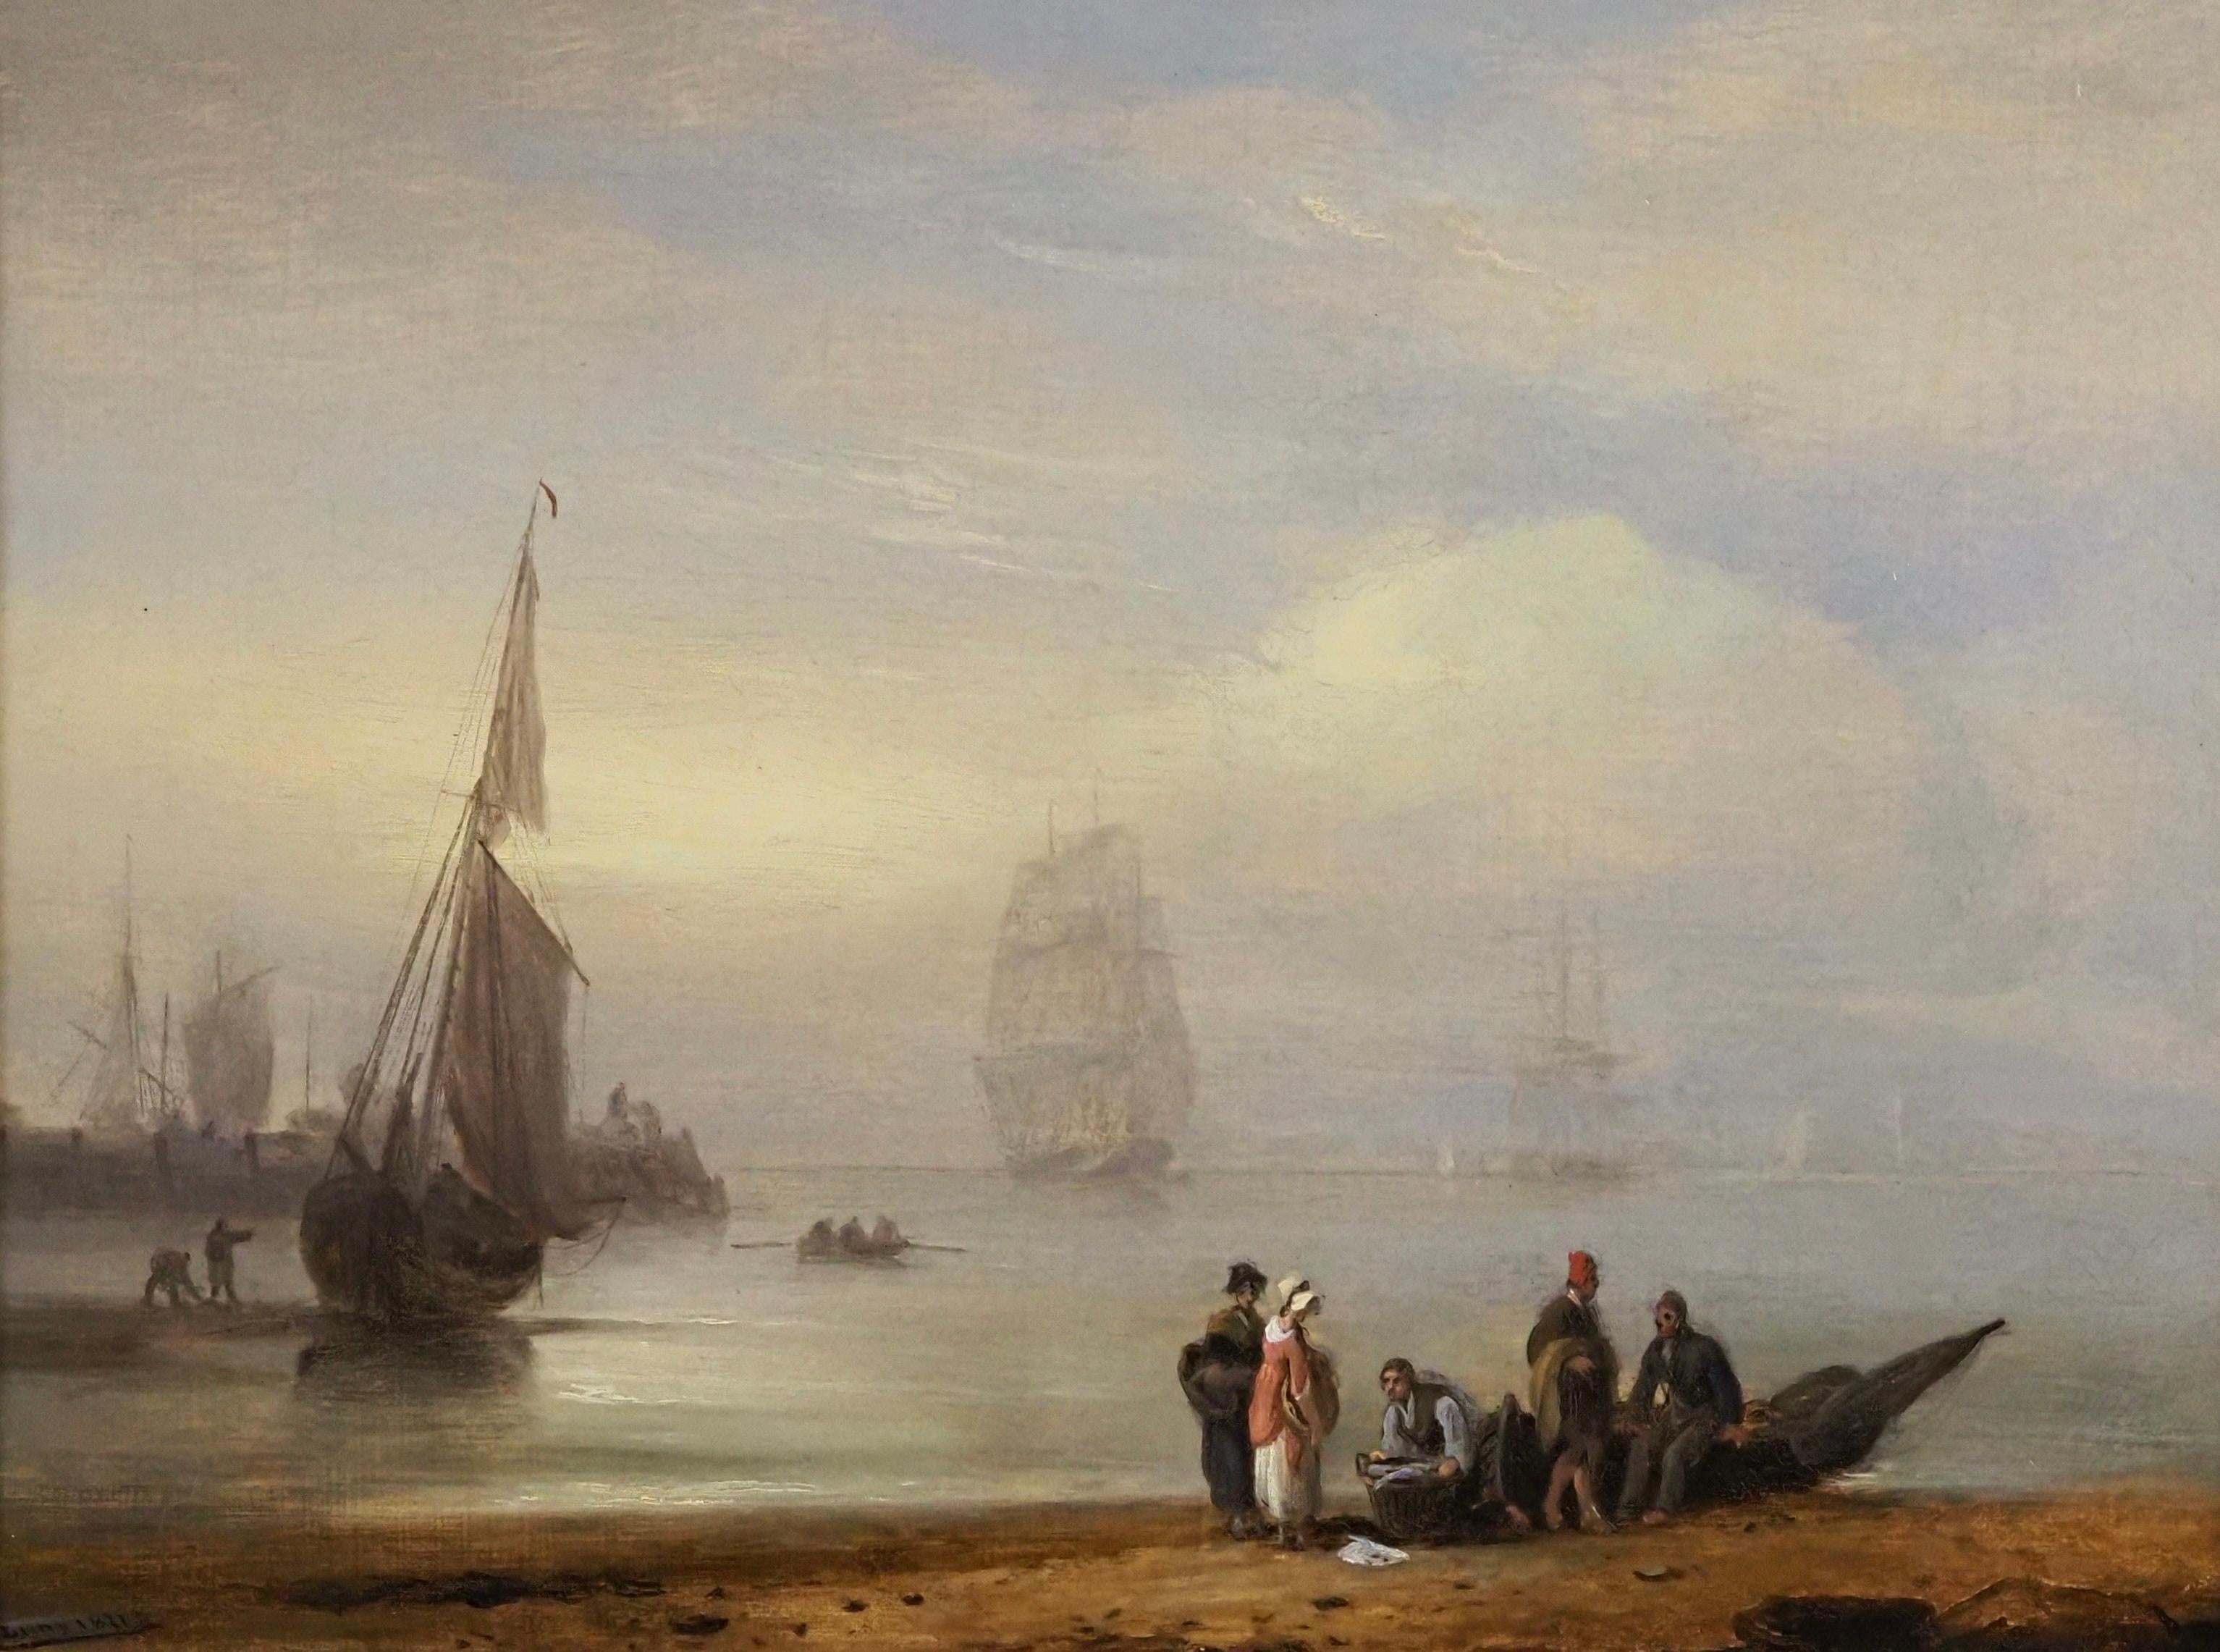 A fishing vessels at rest in harbour - Painting by Thomas Luny